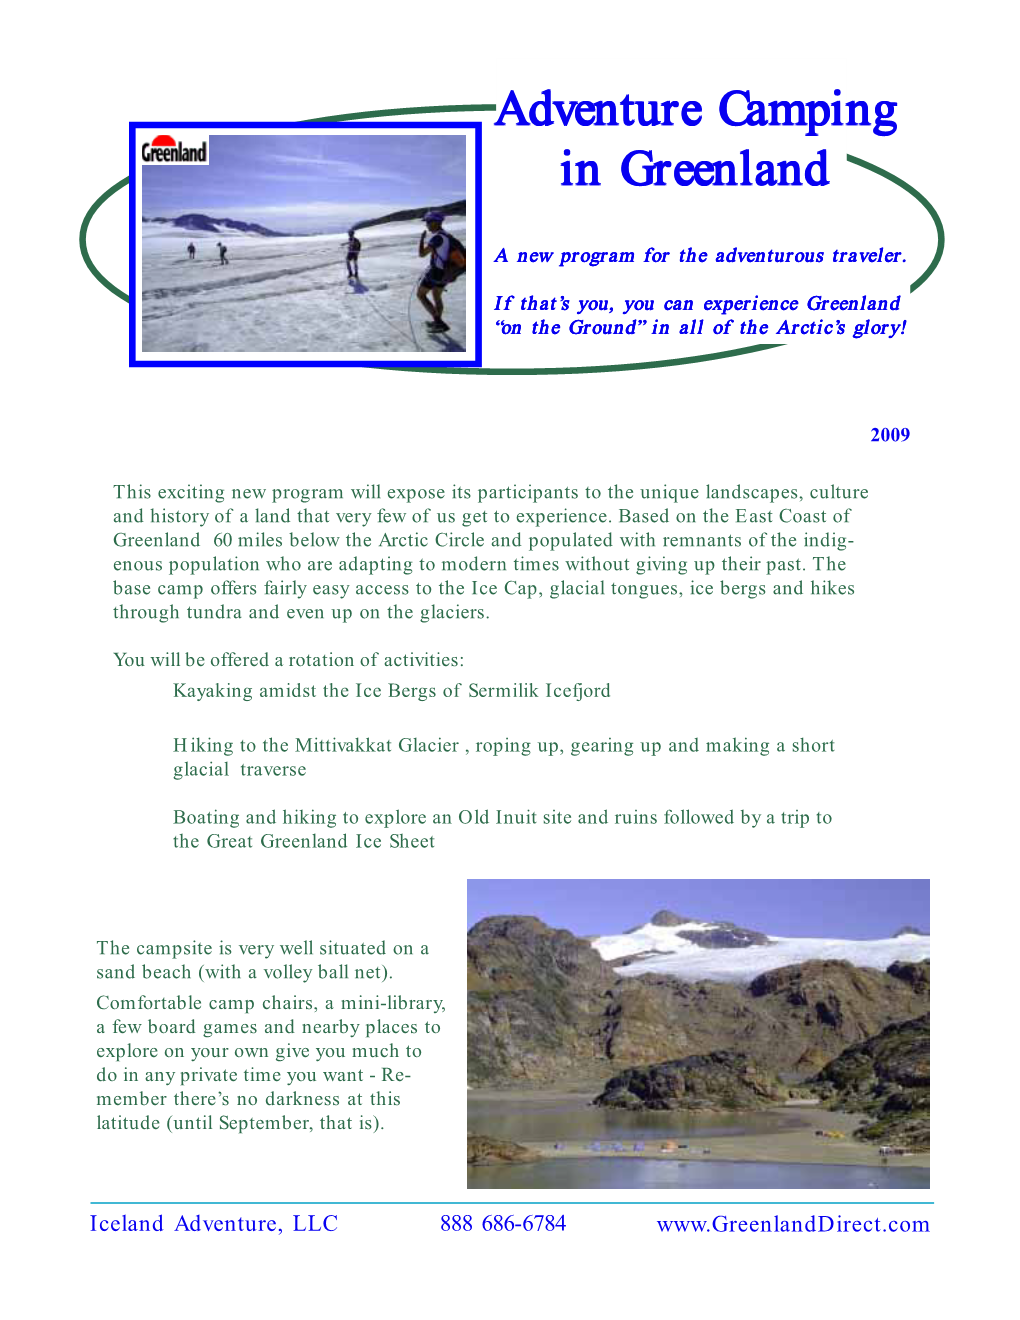 Adventure Camping in Greenland